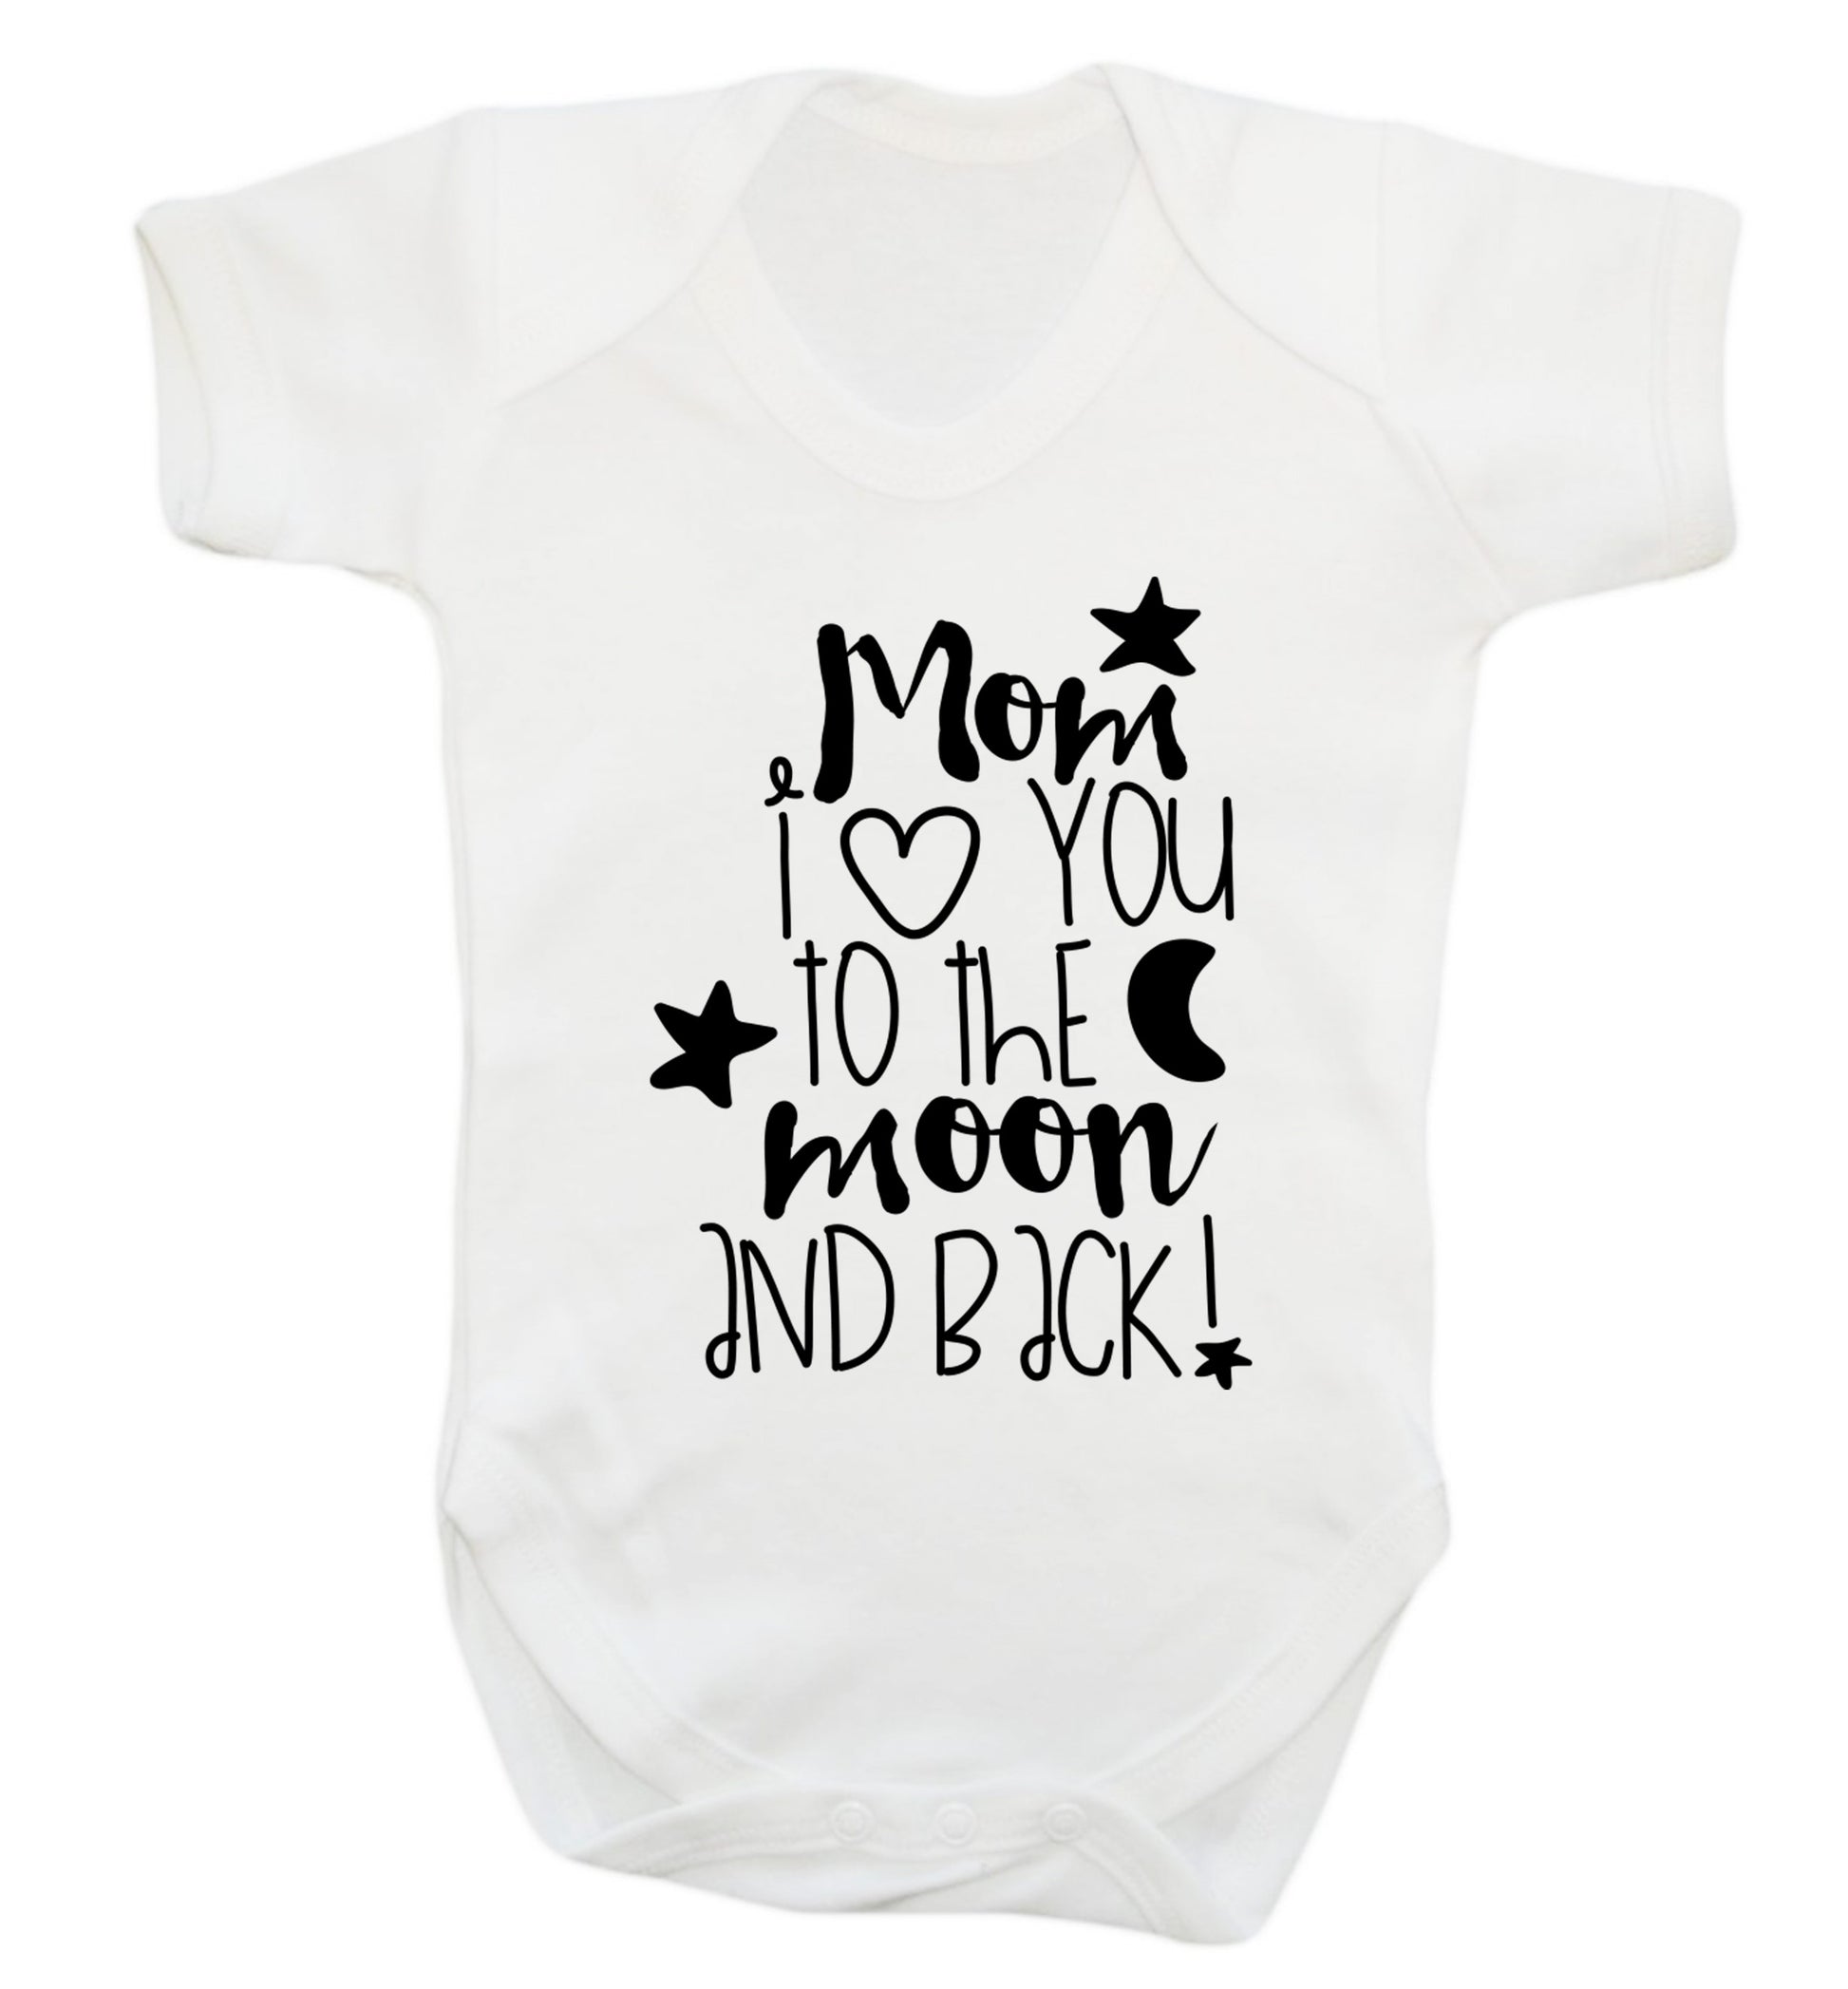 Dad I love you to the moon and back Baby Vest white 18-24 months